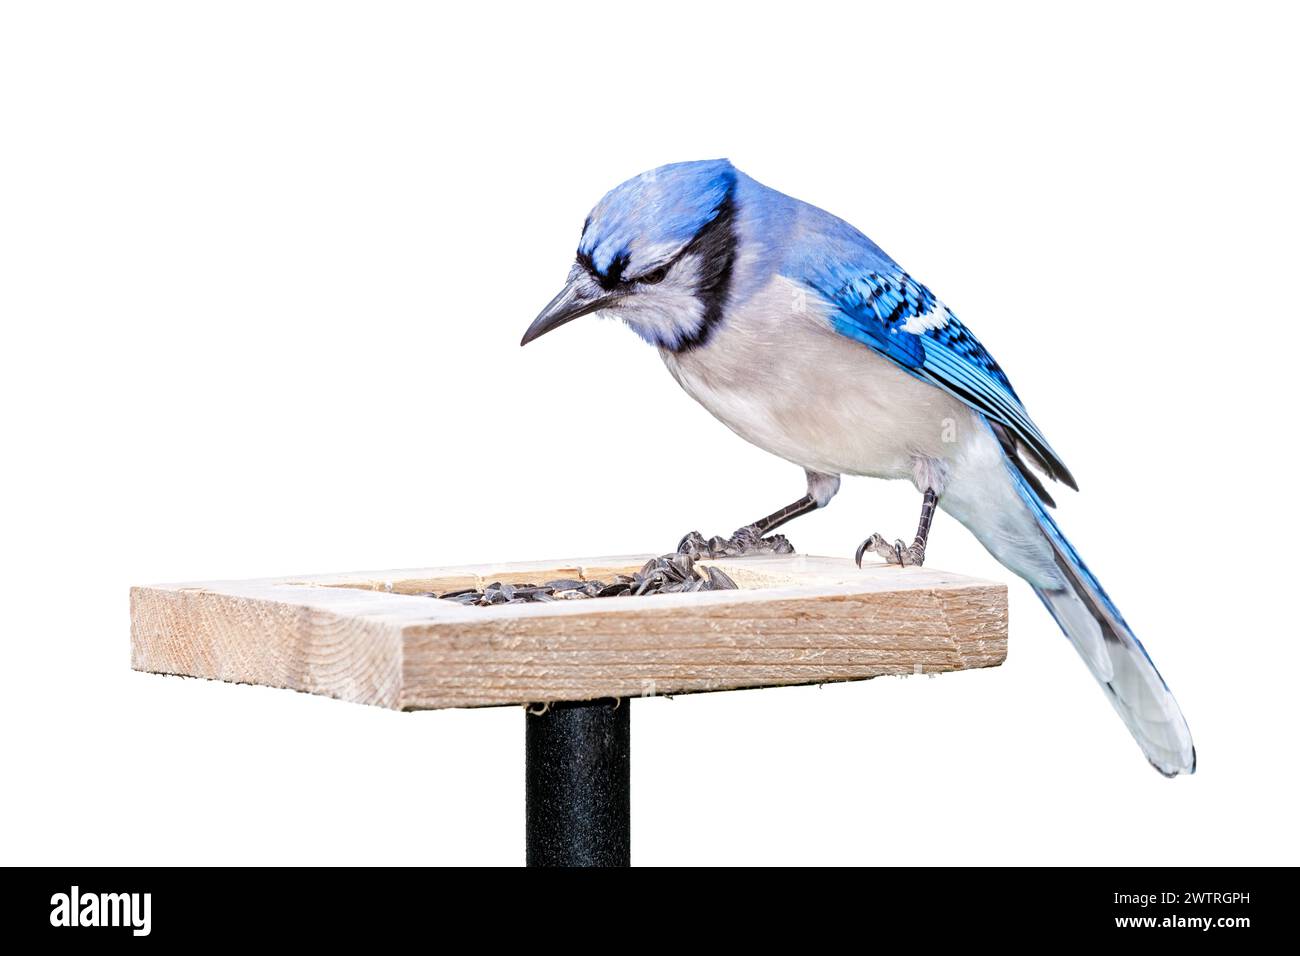 A bluejay sits on top of a sunflower seed feeder. White background. Stock Photo